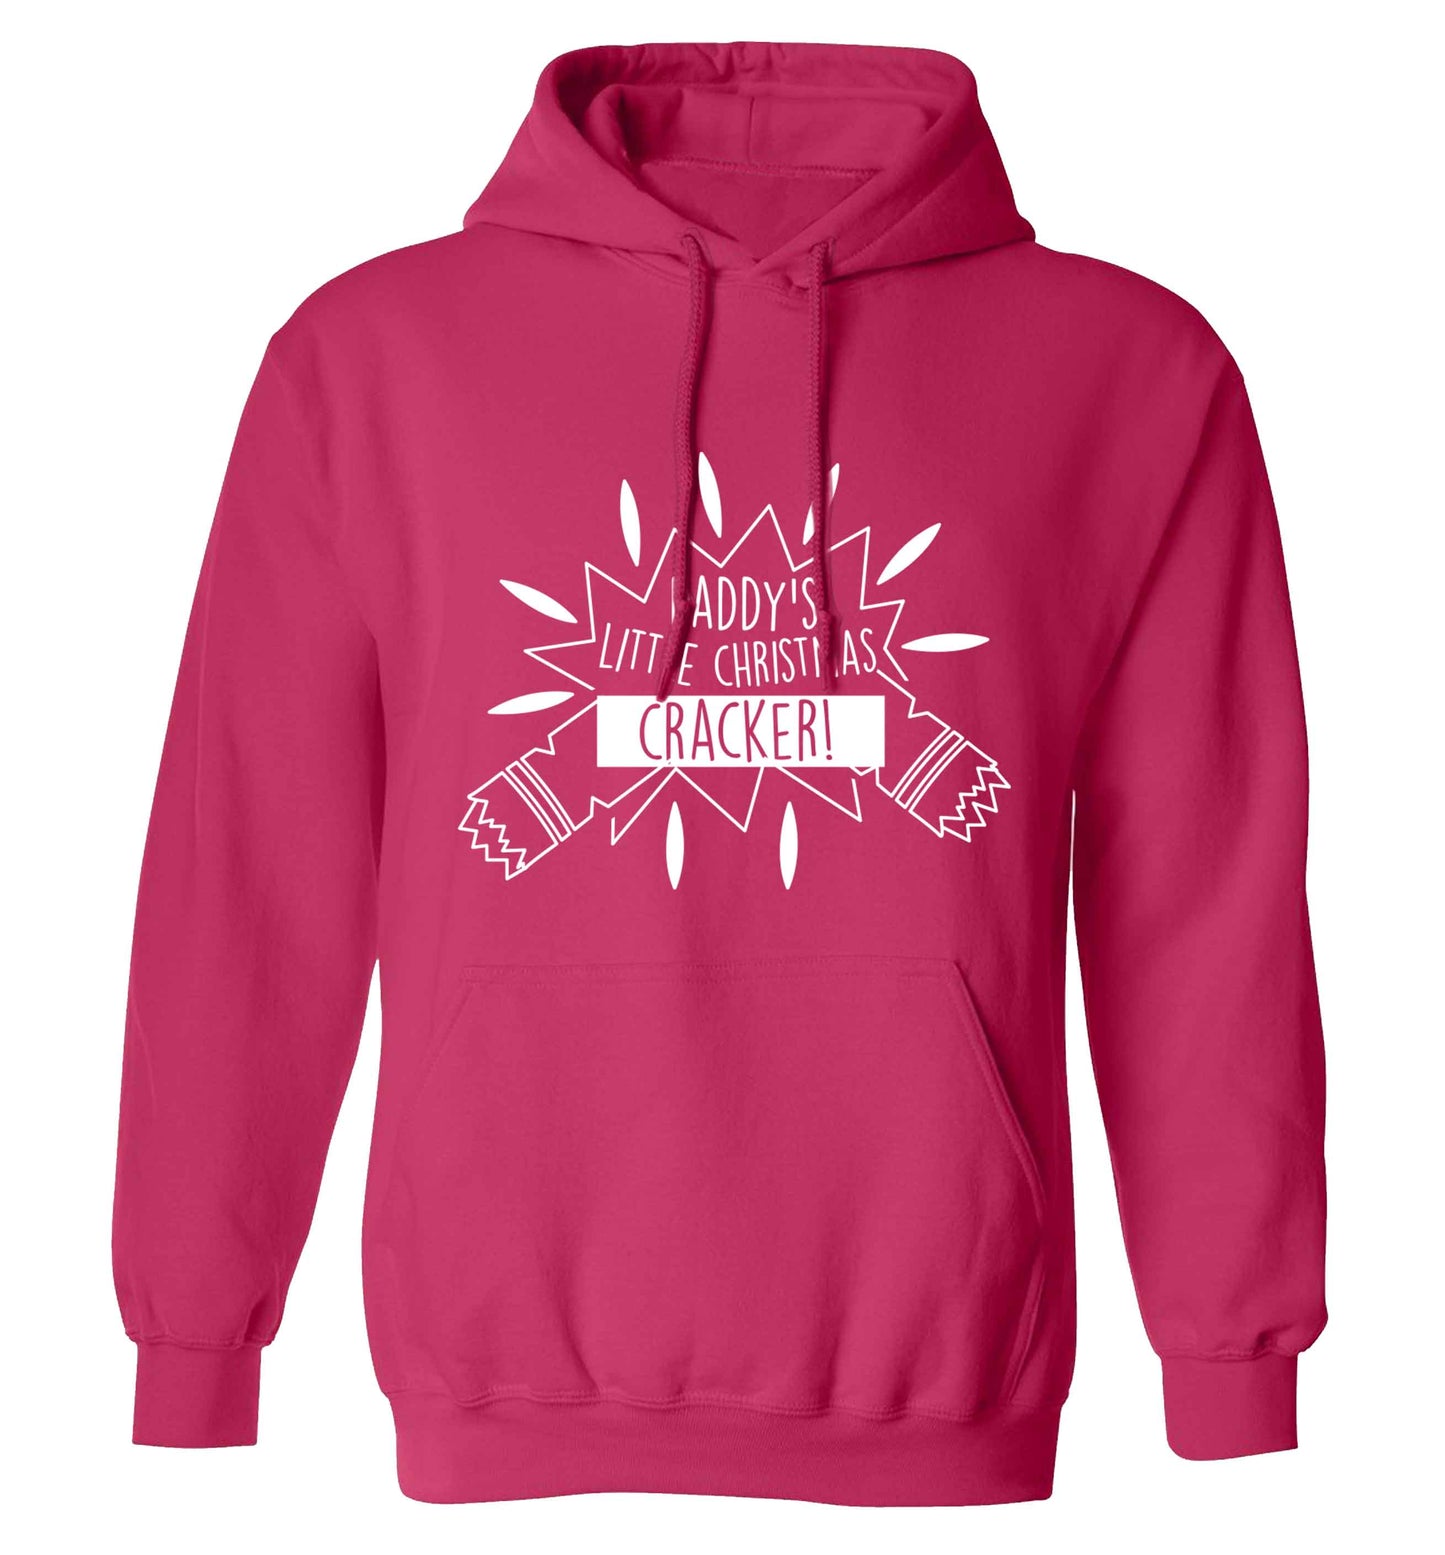 Daddy's little Christmas cracker adults unisex pink hoodie 2XL